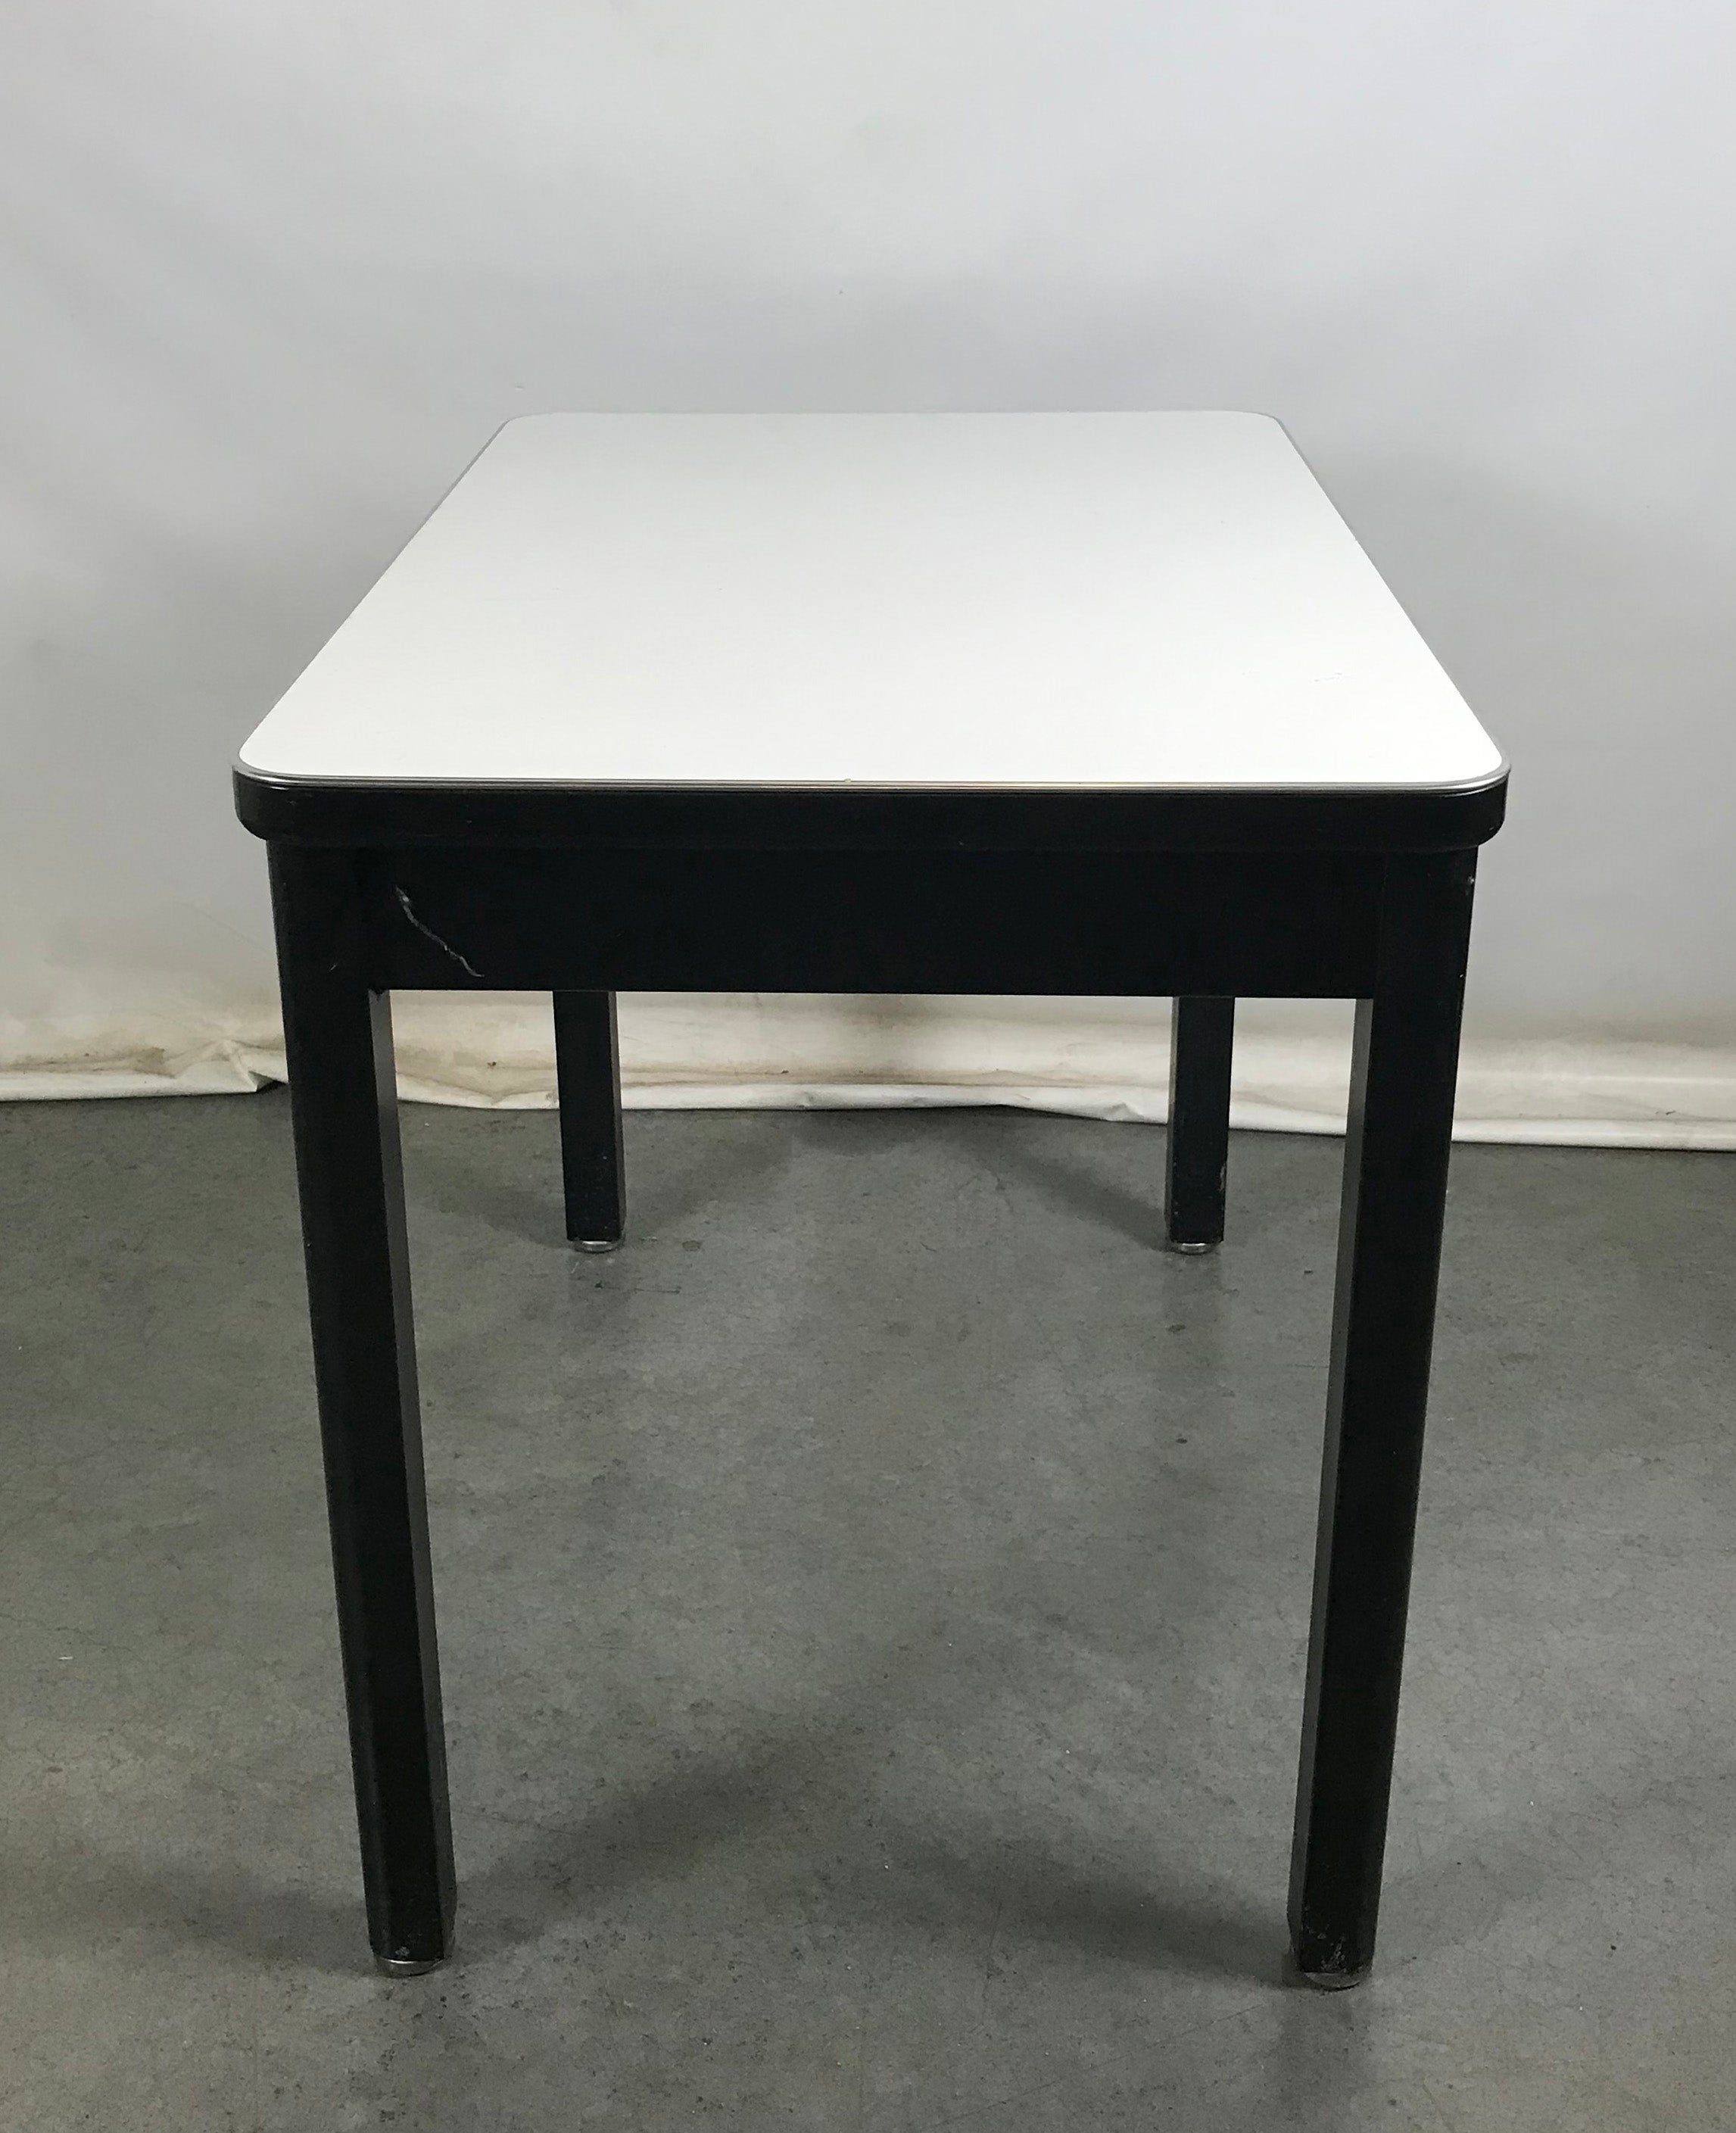 Black and White Metal Table